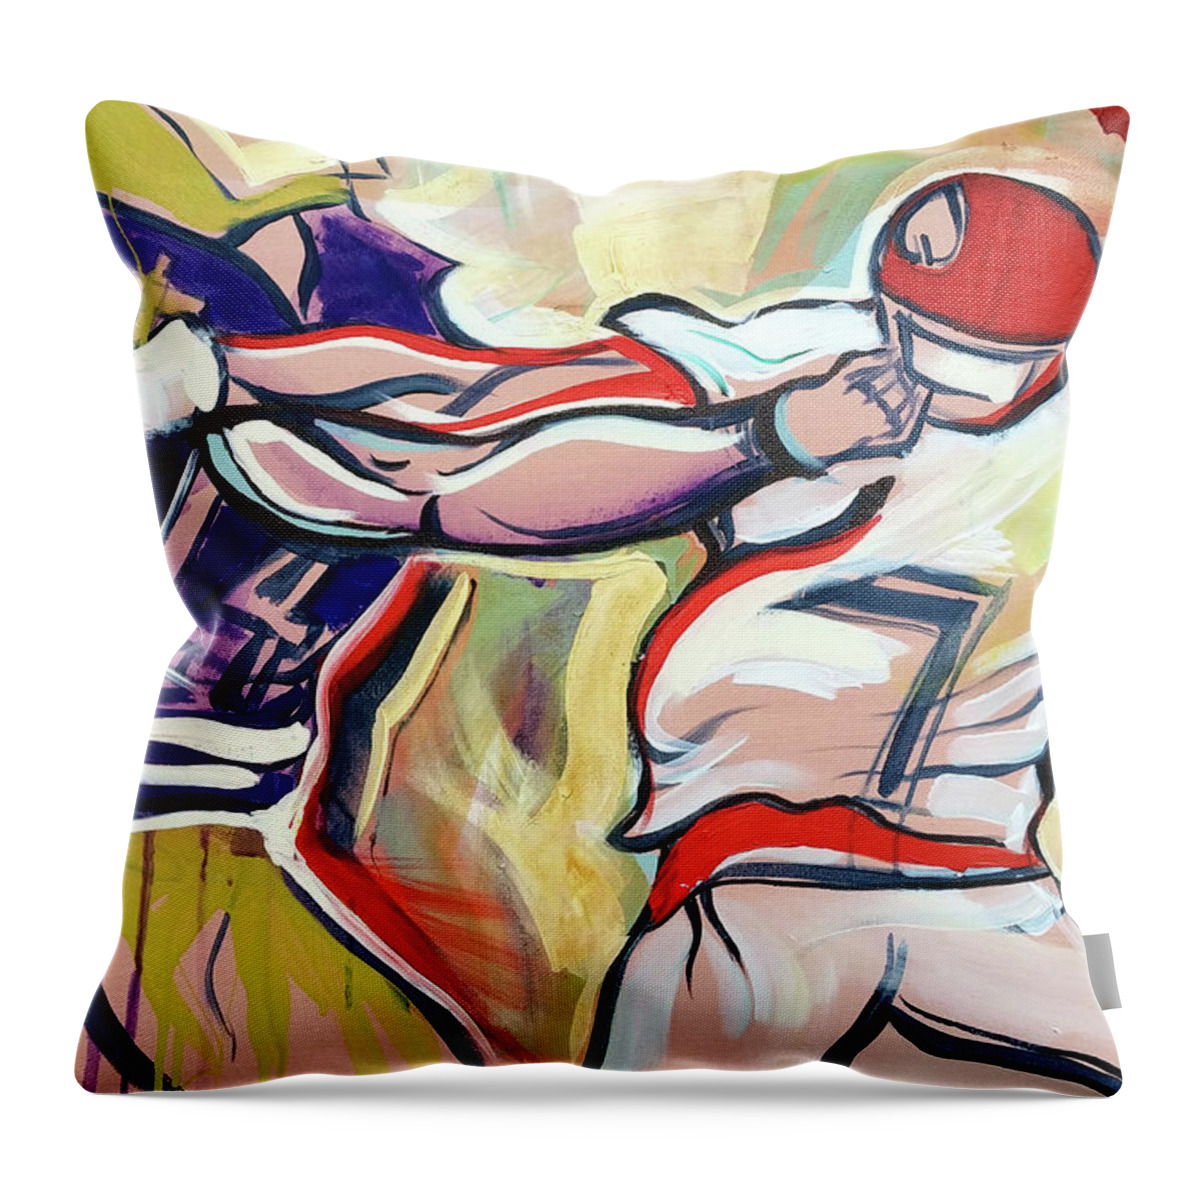  Throw Pillow featuring the painting Side Arm Uga by John Gholson